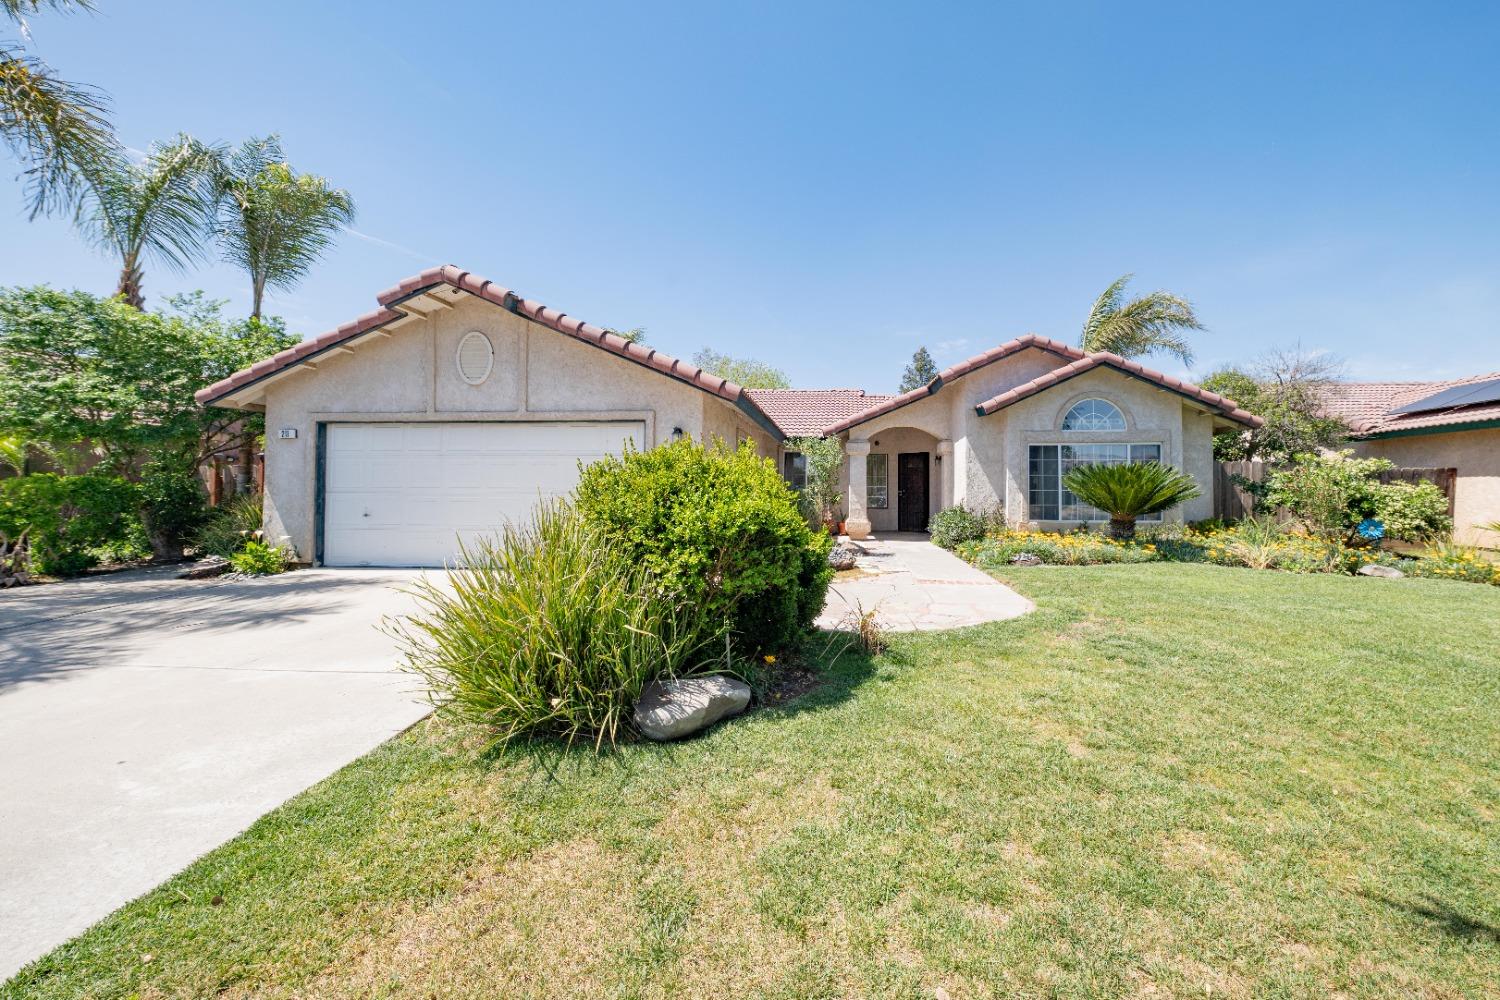 Photo of 211 Riviera Dr in Lemoore, CA